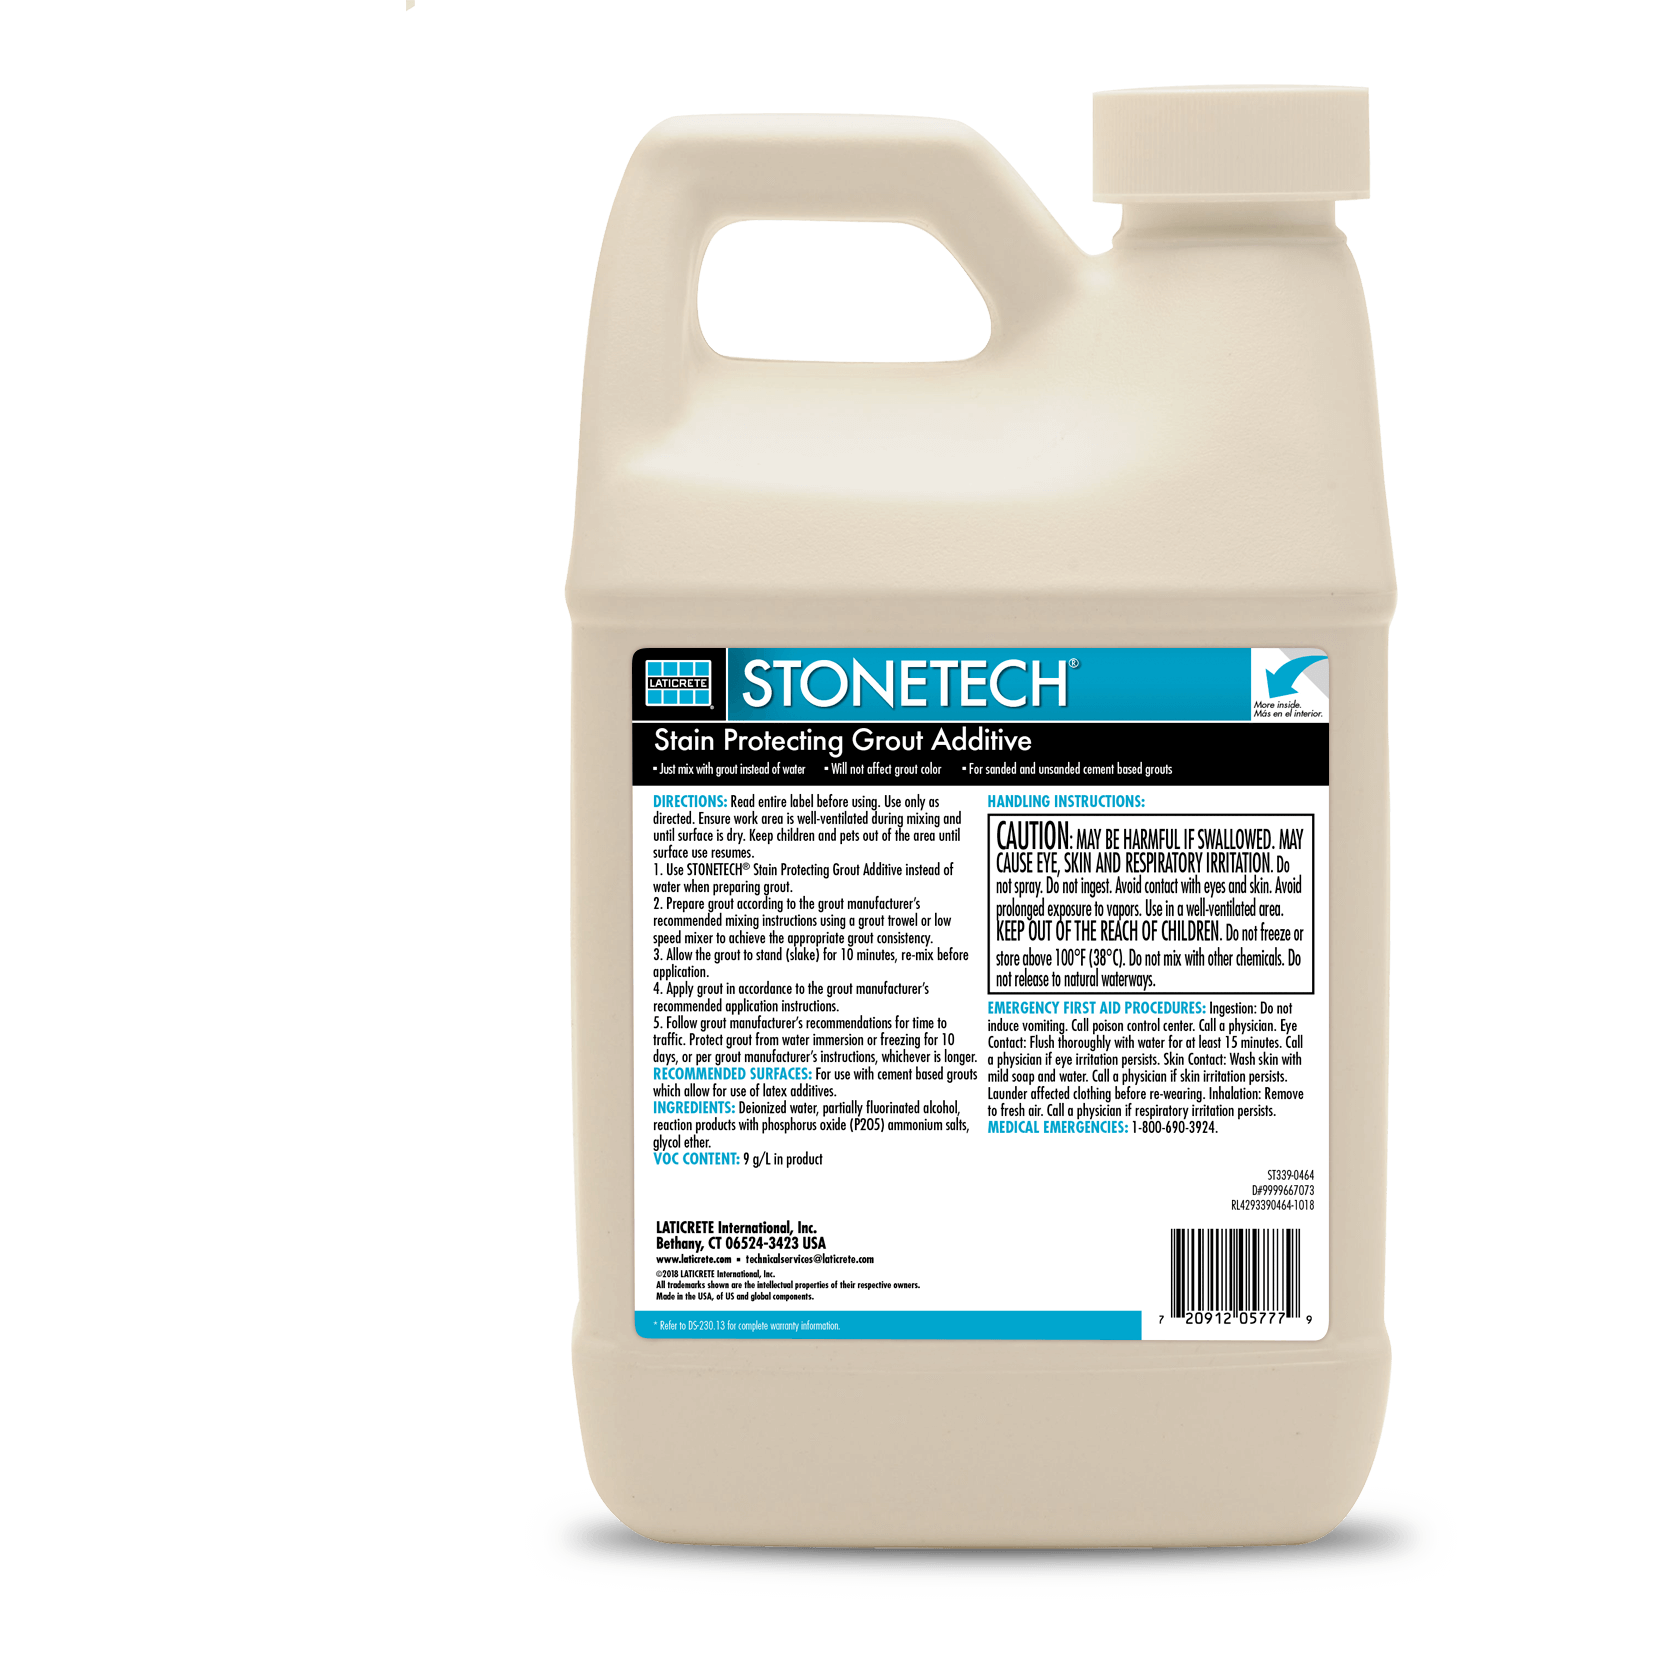 STONETECH® Stain Protecting Grout Additive